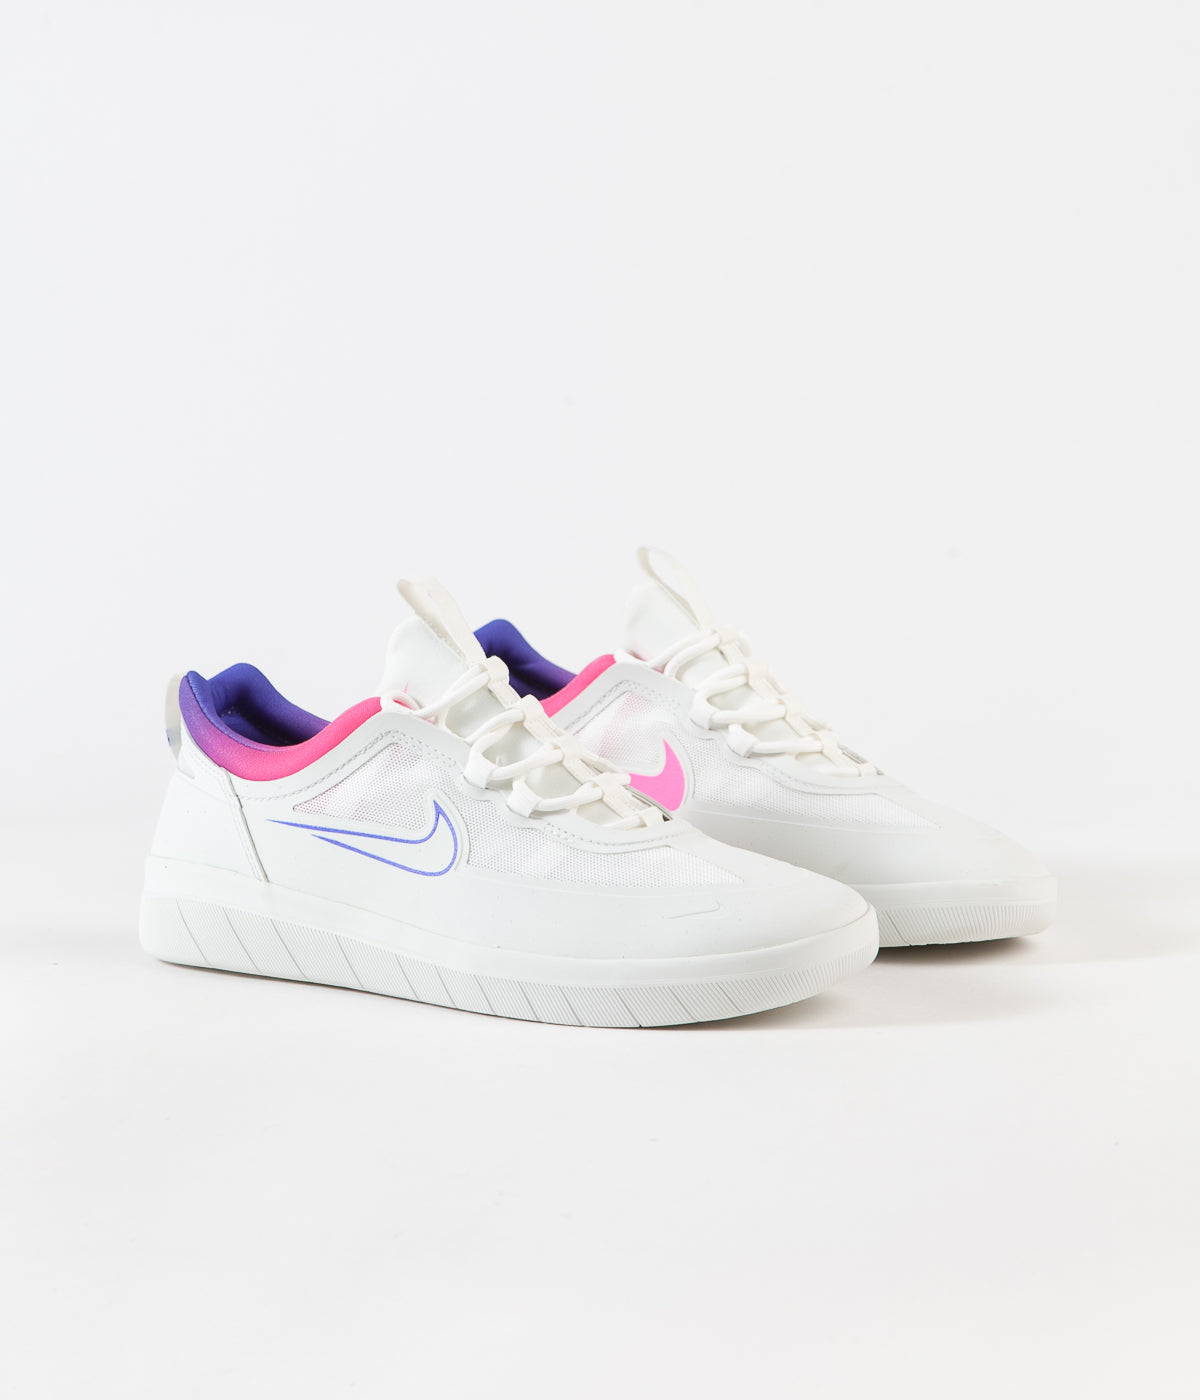 blue pink and purple nike shoes